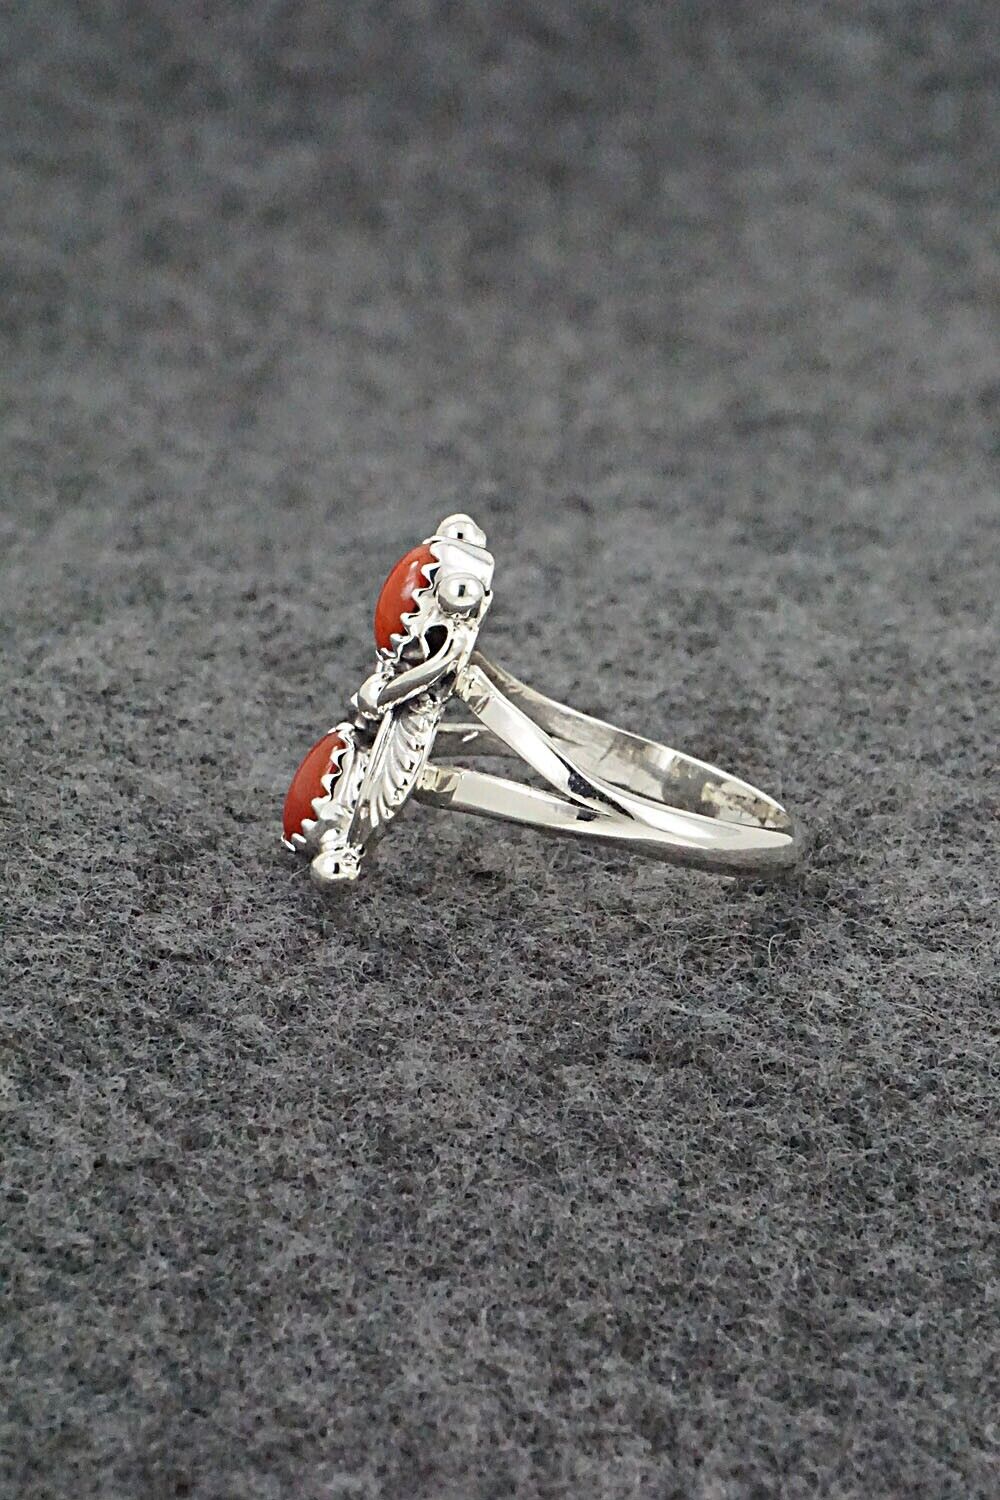 Coral & Sterling Silver Ring - Judy Largo - Size 7